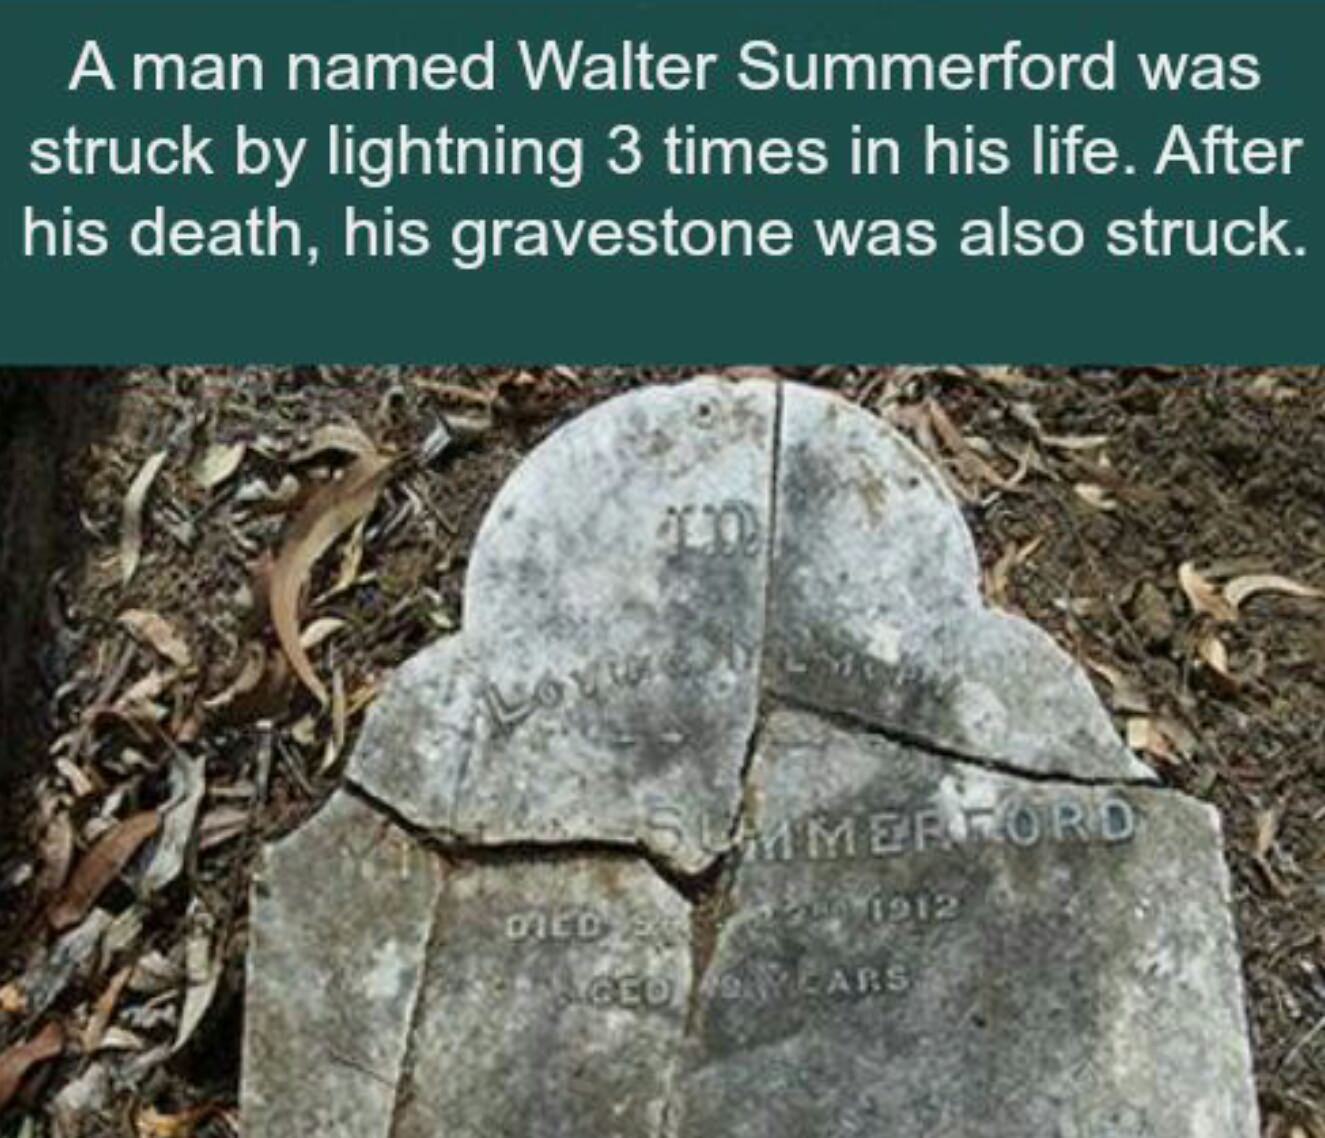 walter summerford - A man named Walter Summerford was struck by lightning 3 times in his life. After his death, his gravestone was also struck. Summer Ford Died 1912 Georgiars